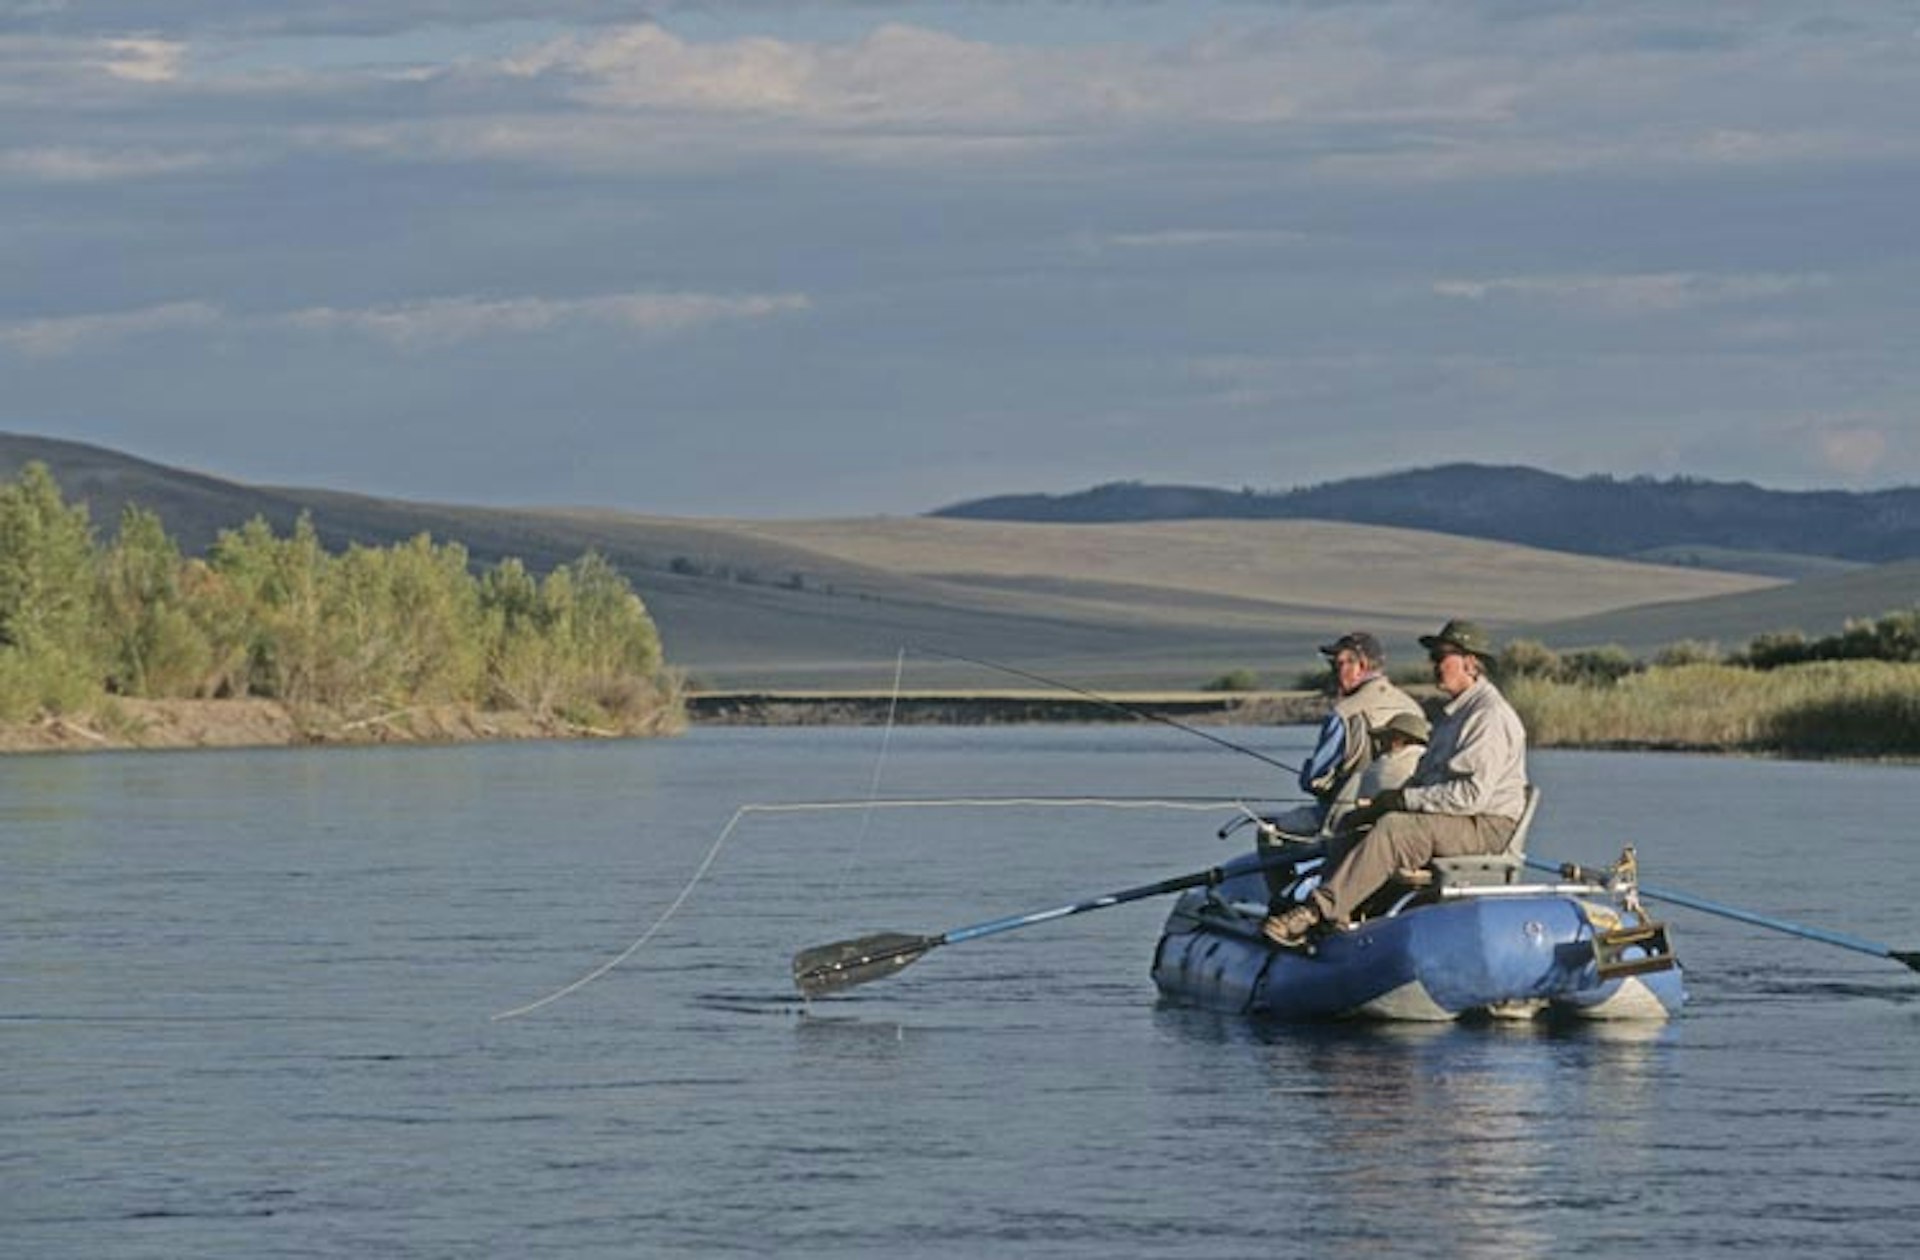 Looking for a tranquil spot to sling a hook? Try fly-fishing in remote Mongolia. Image by Dave Hamman / E+ / Getty Images